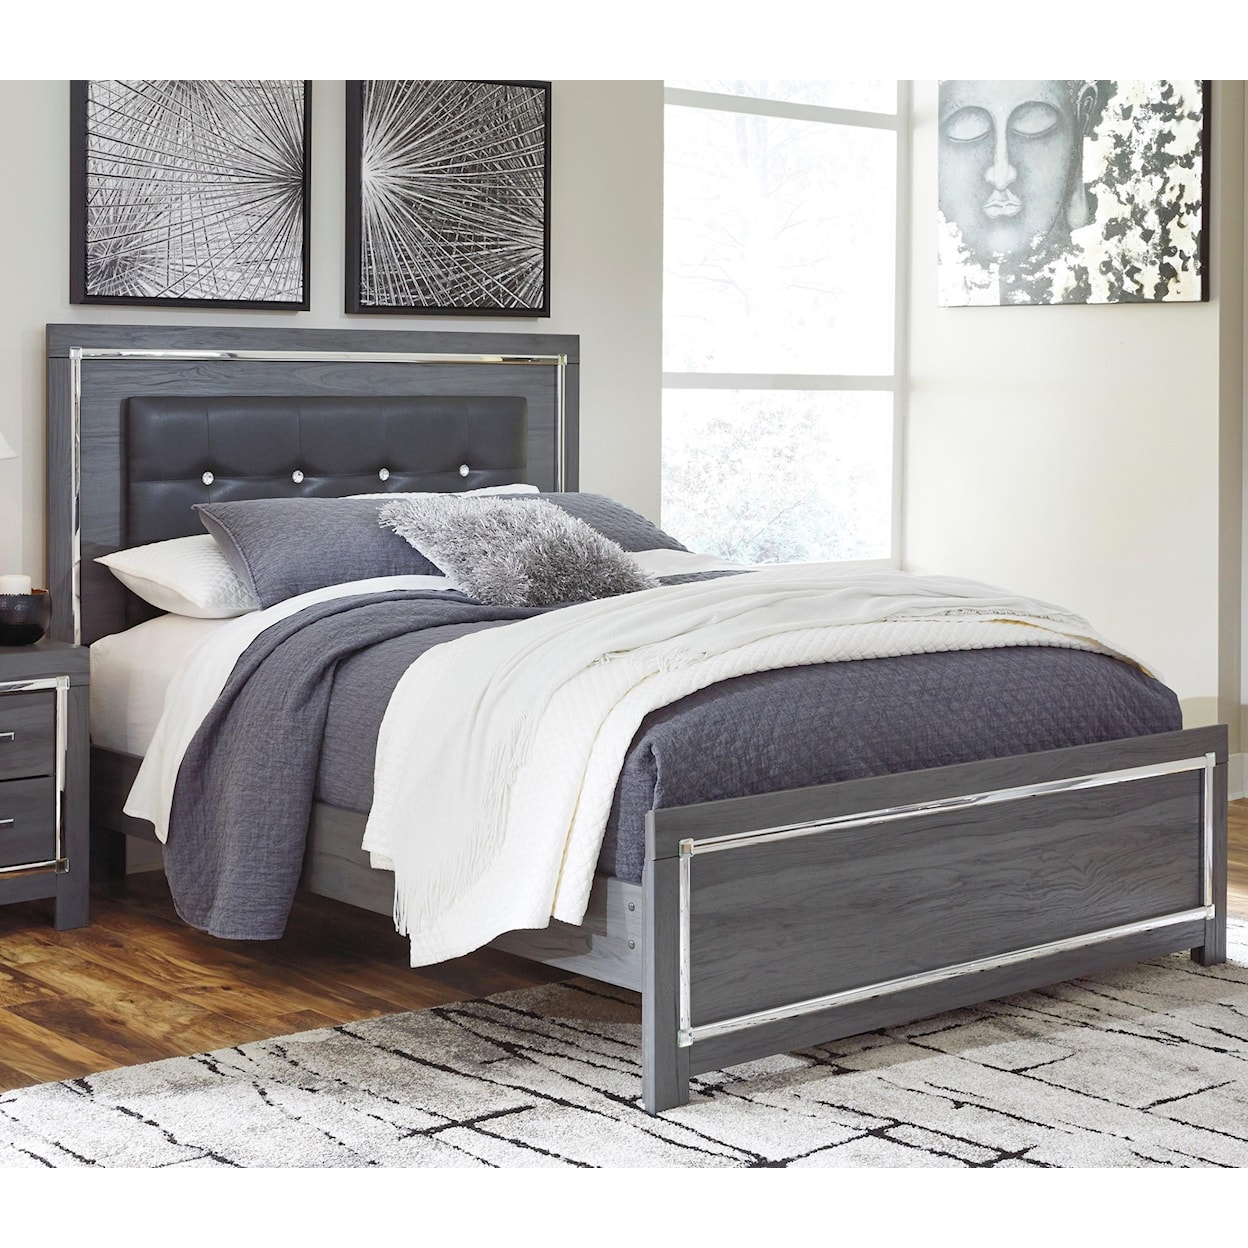 Ashley Furniture Signature Design Lodanna Queen Upholstered Bed